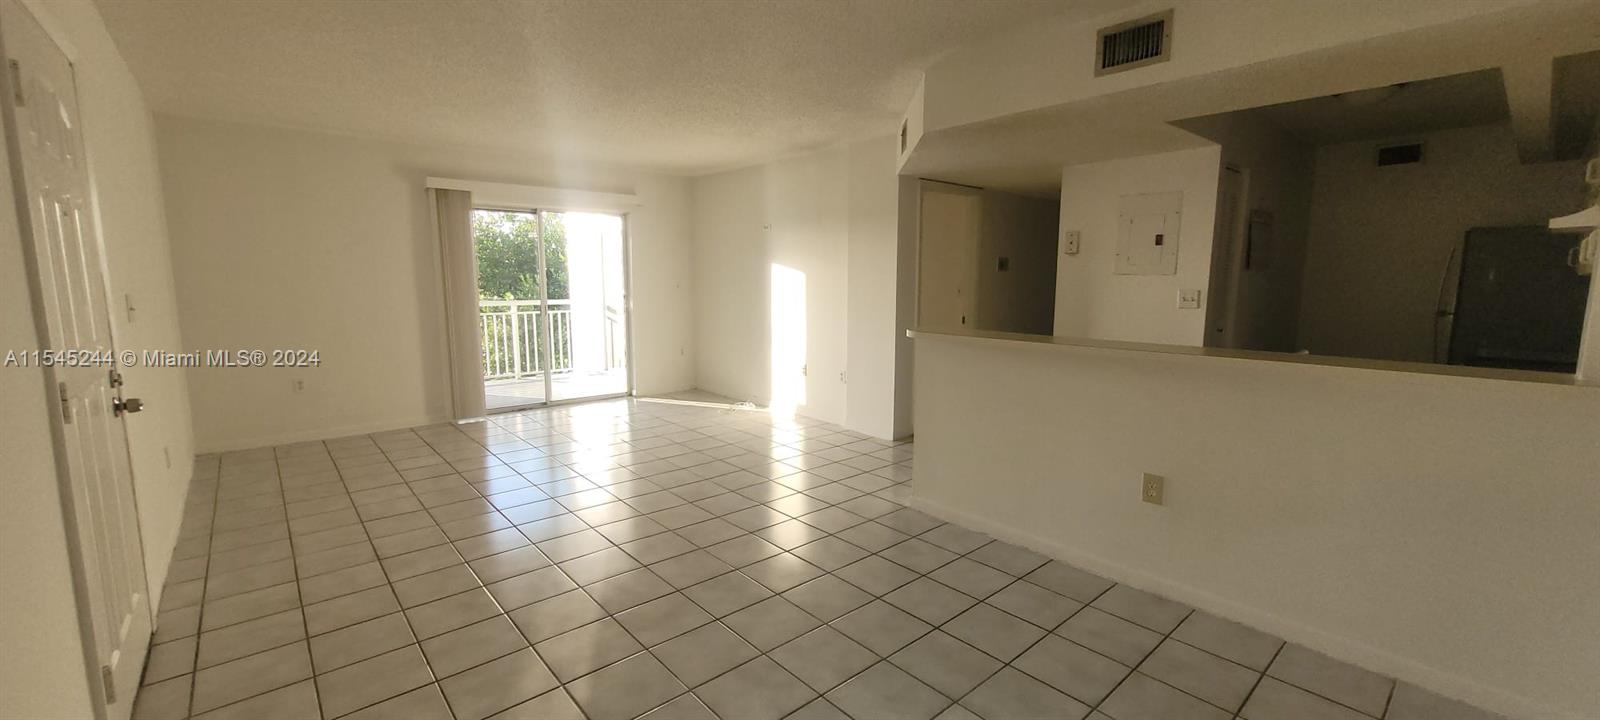 8580 SW 212th St #301 For Sale A11545244, FL